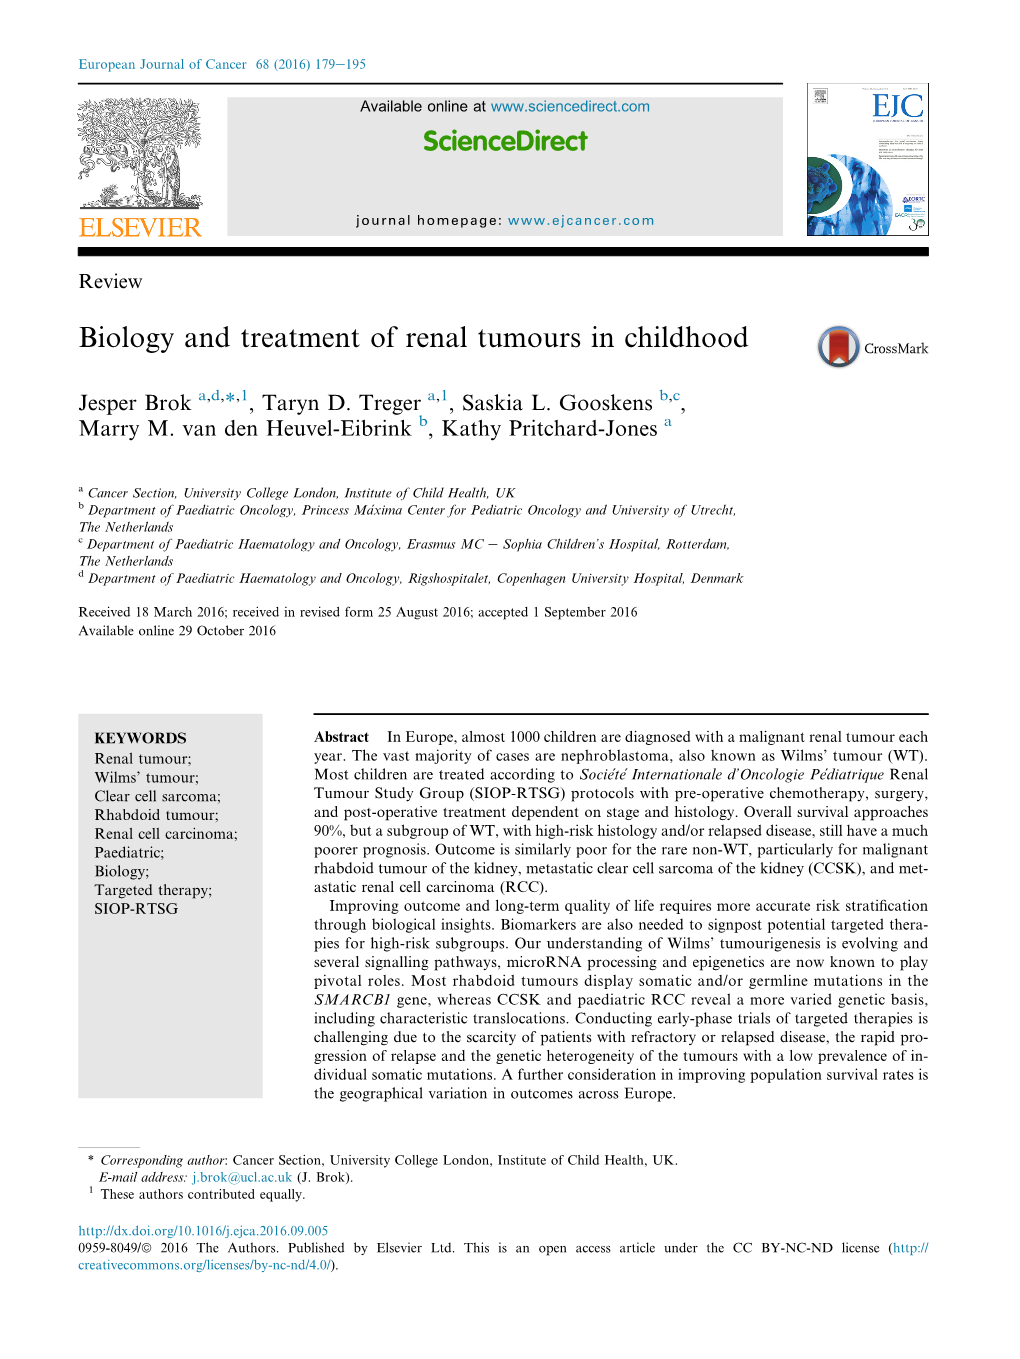 Biology and Treatment of Renal Tumours in Childhood